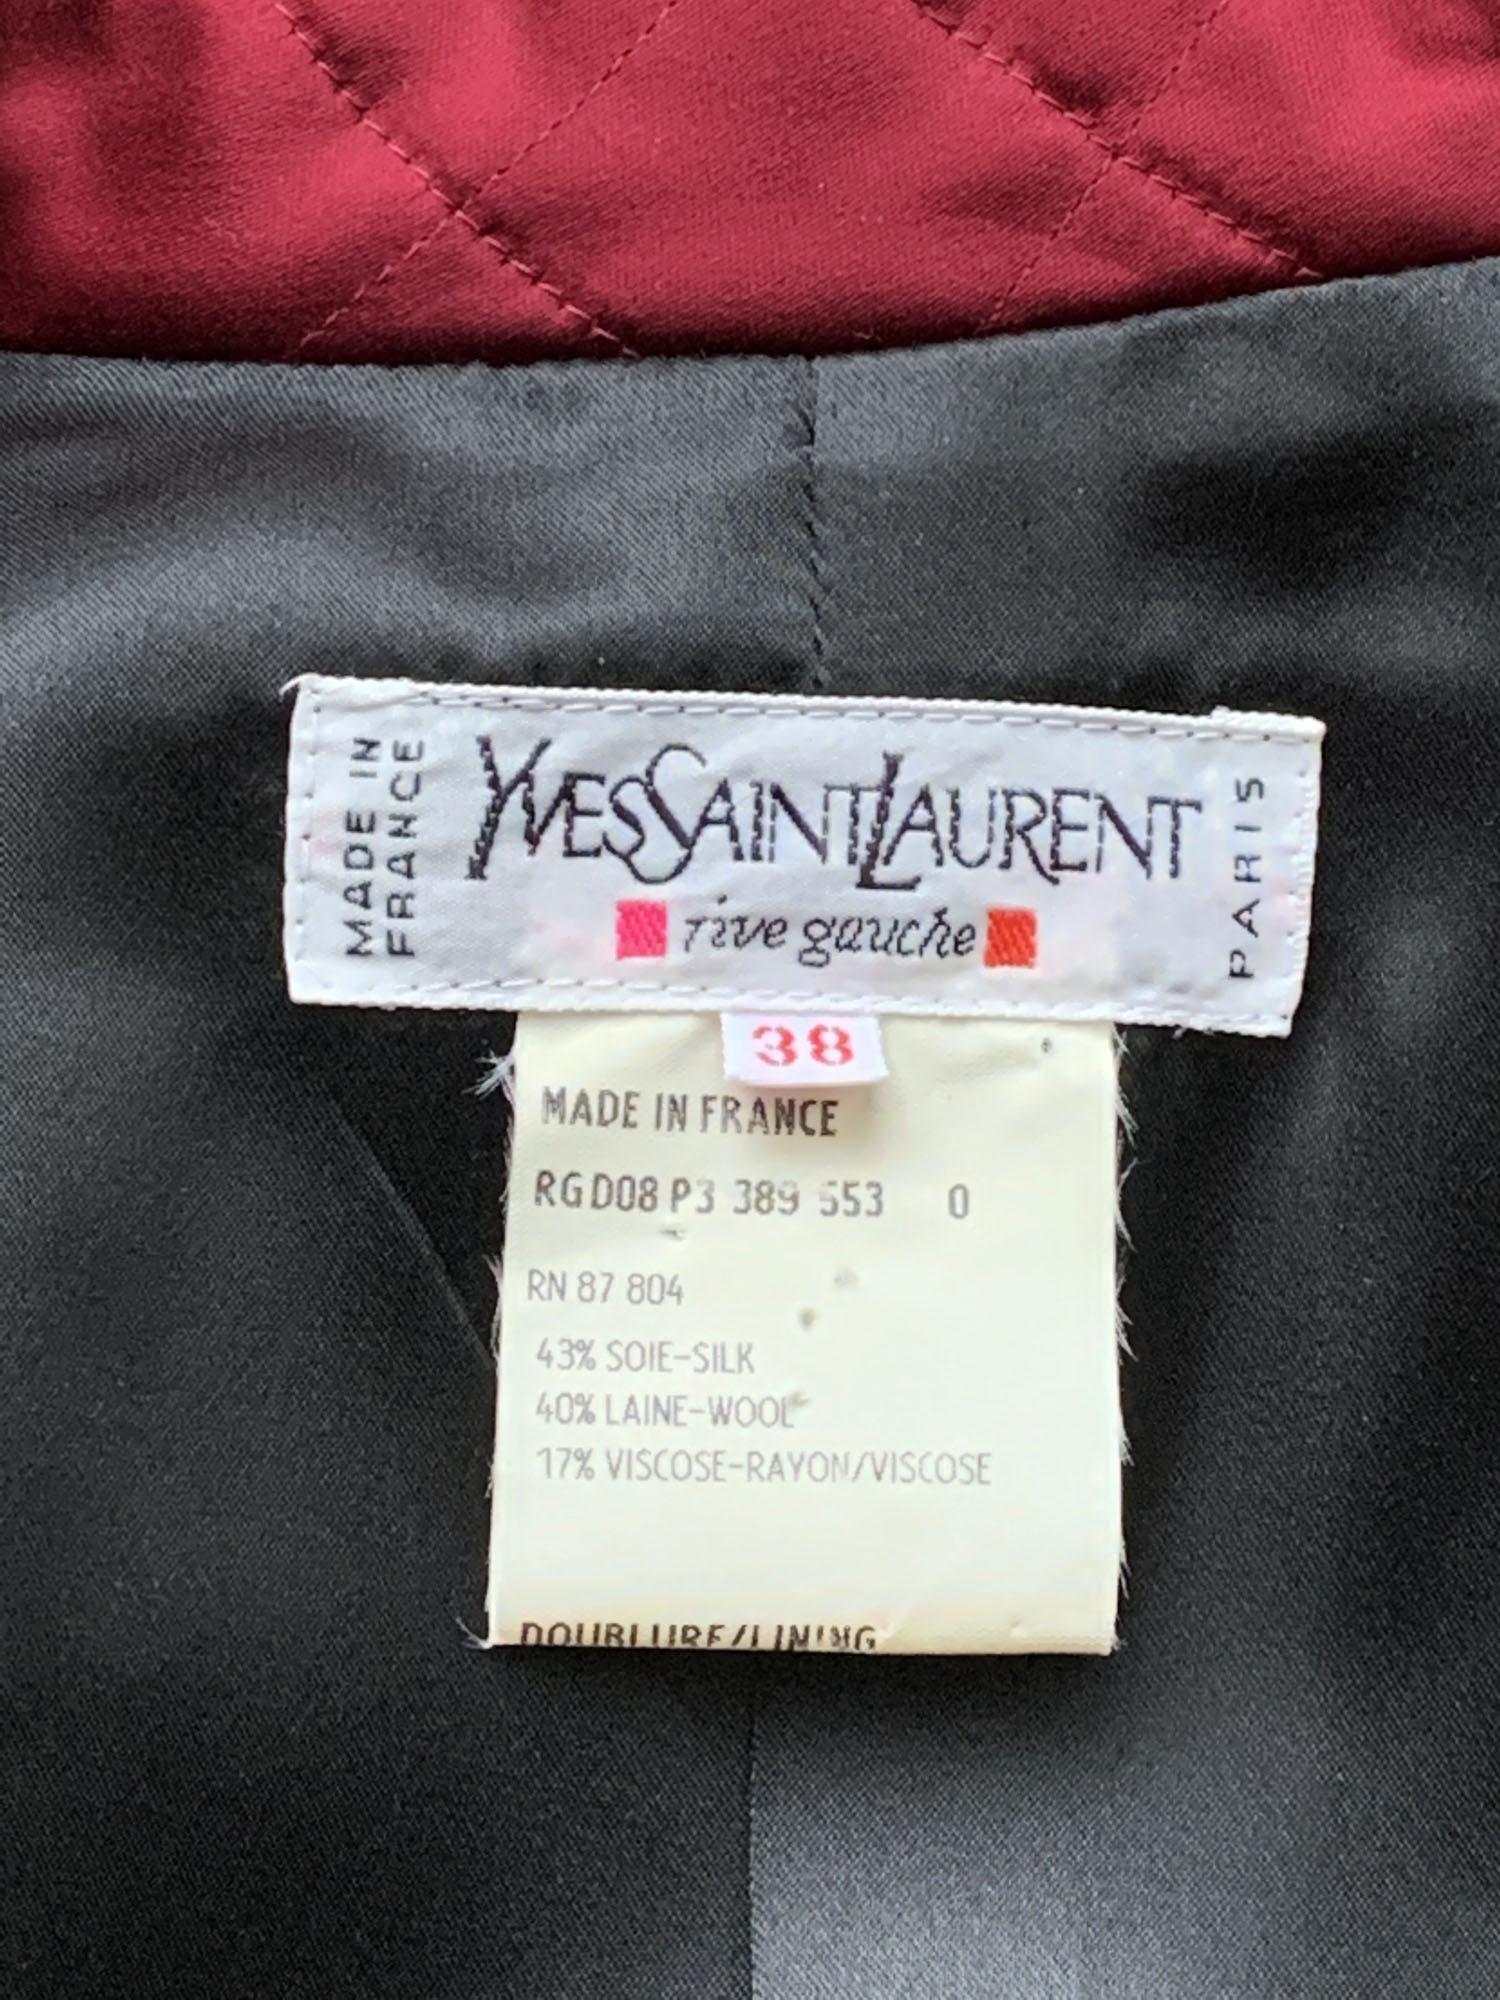  Yves Saint Laurent Rive Gauche 80s Le Smoking Silk Wool Black Jacket French 38  For Sale 1